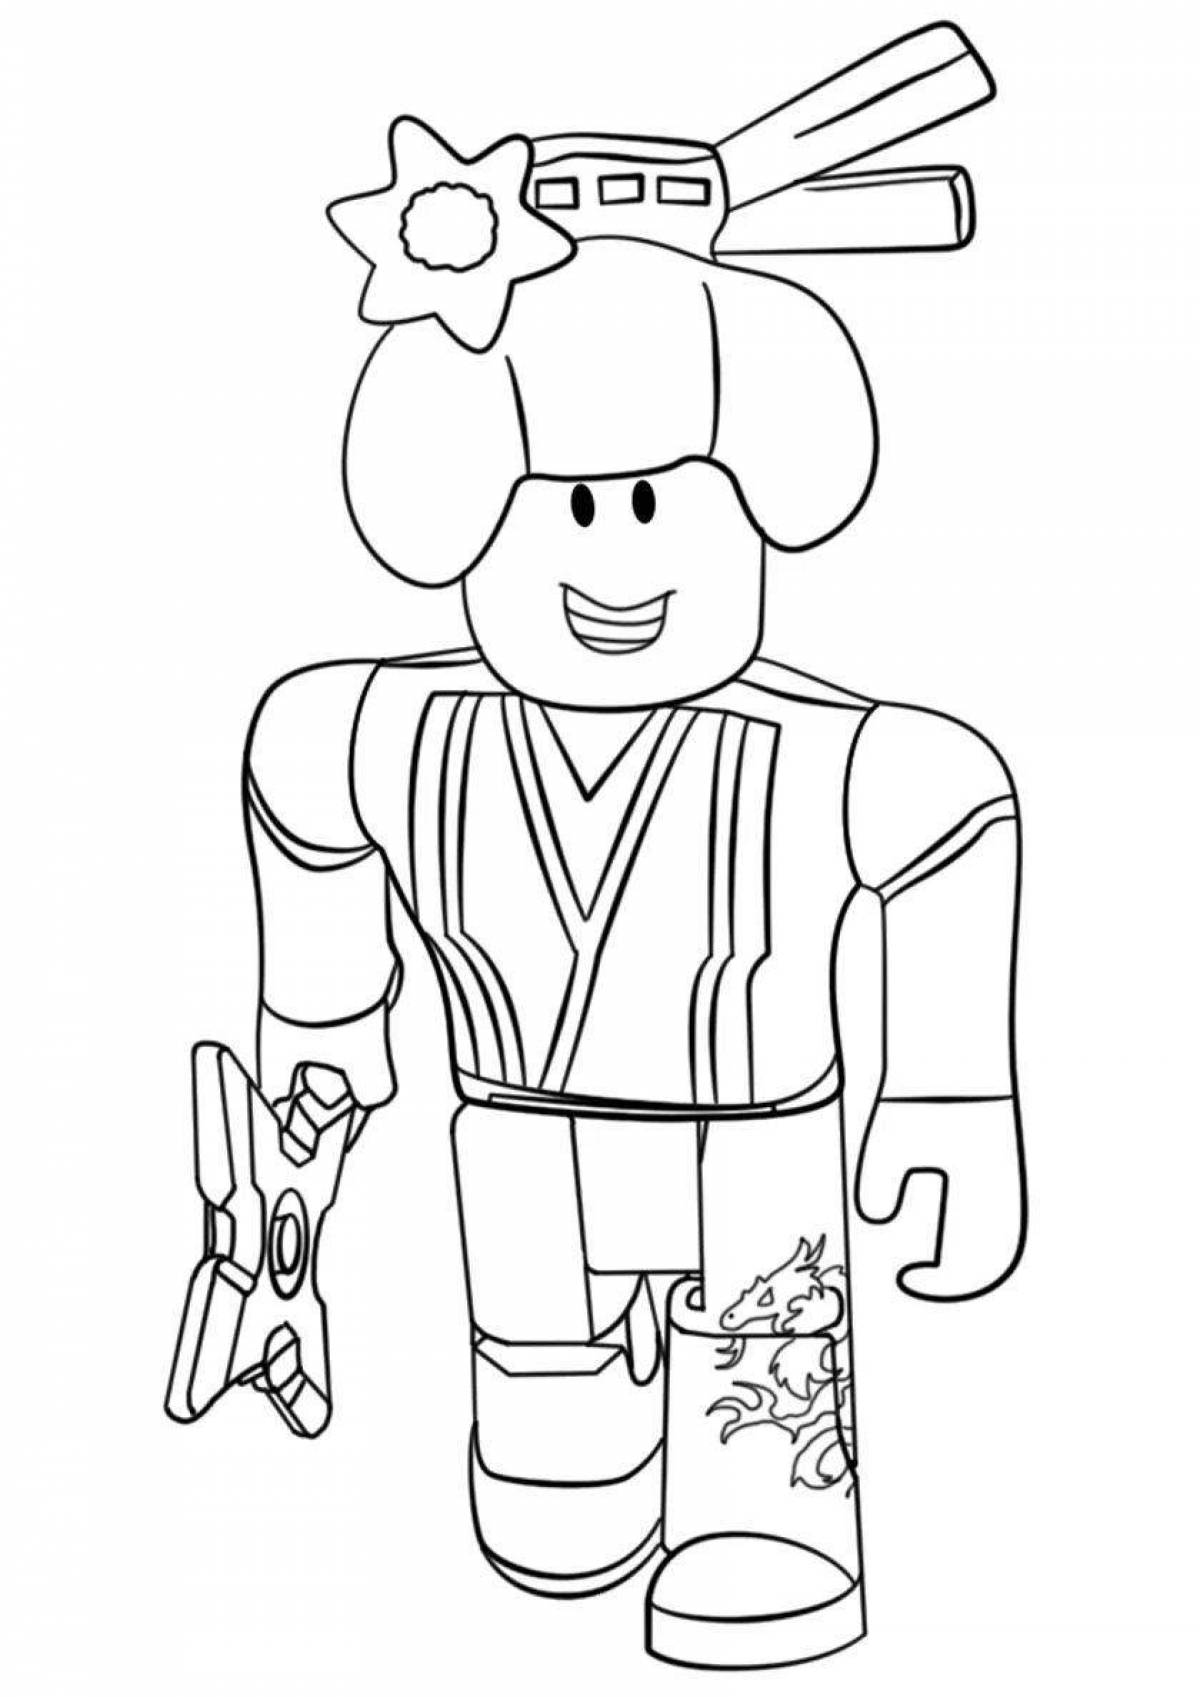 Robloxers coloring book